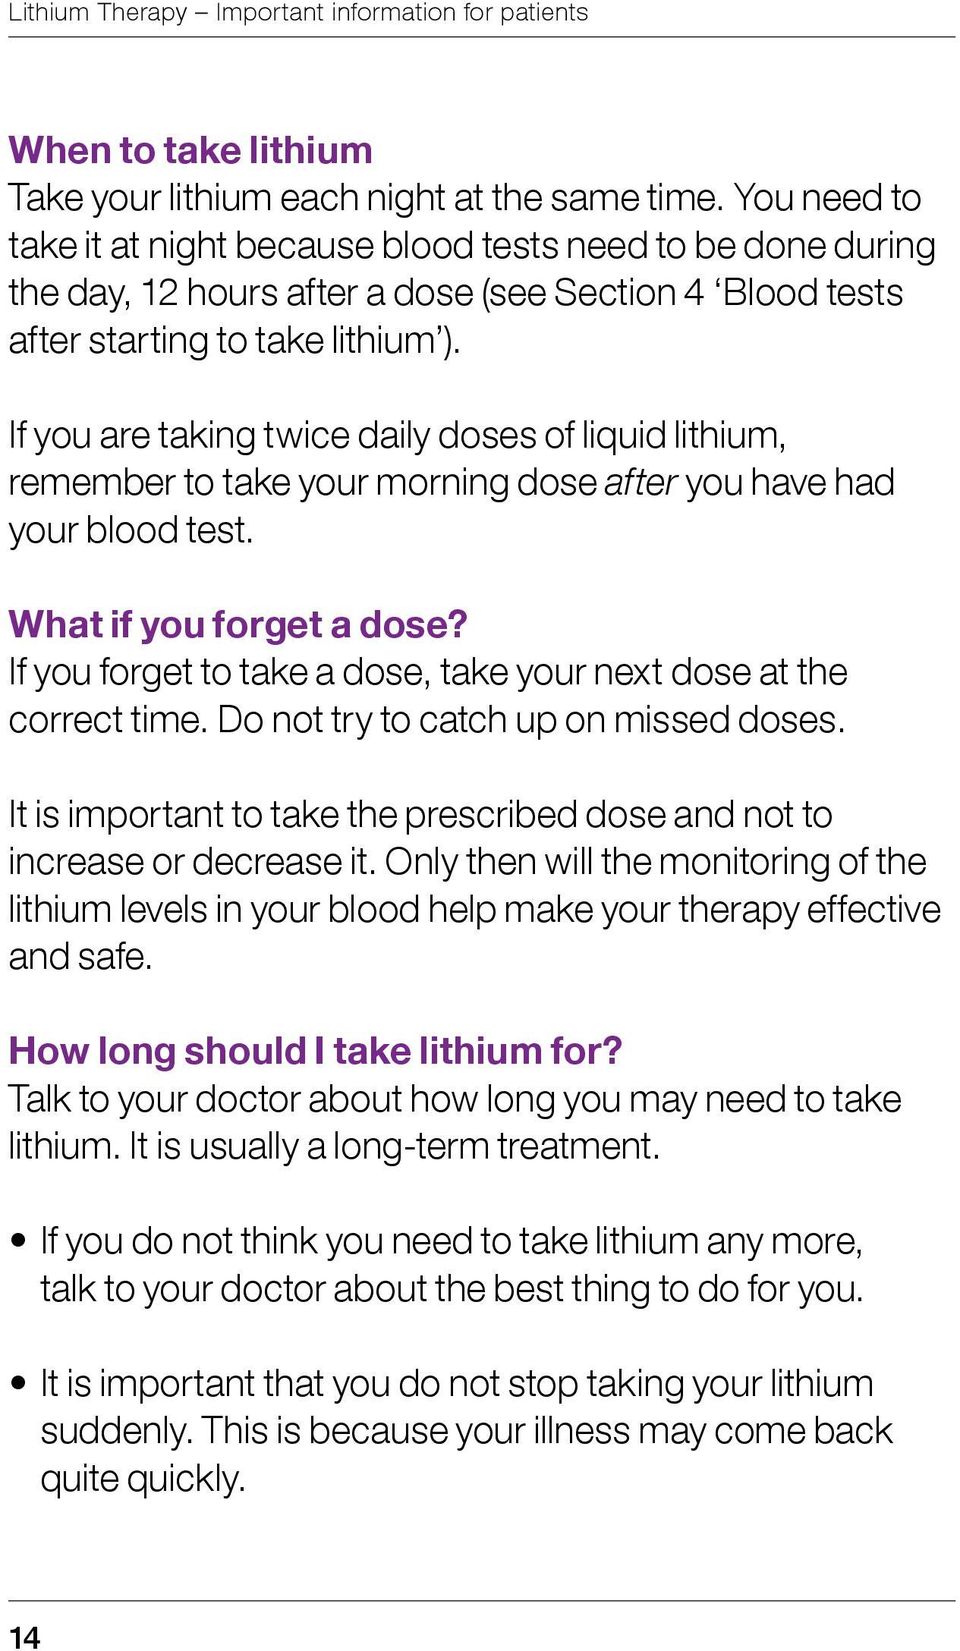 If you are taking twice daily doses of liquid lithium, remember to take your morning dose after you have had your blood test. What if you forget a dose?